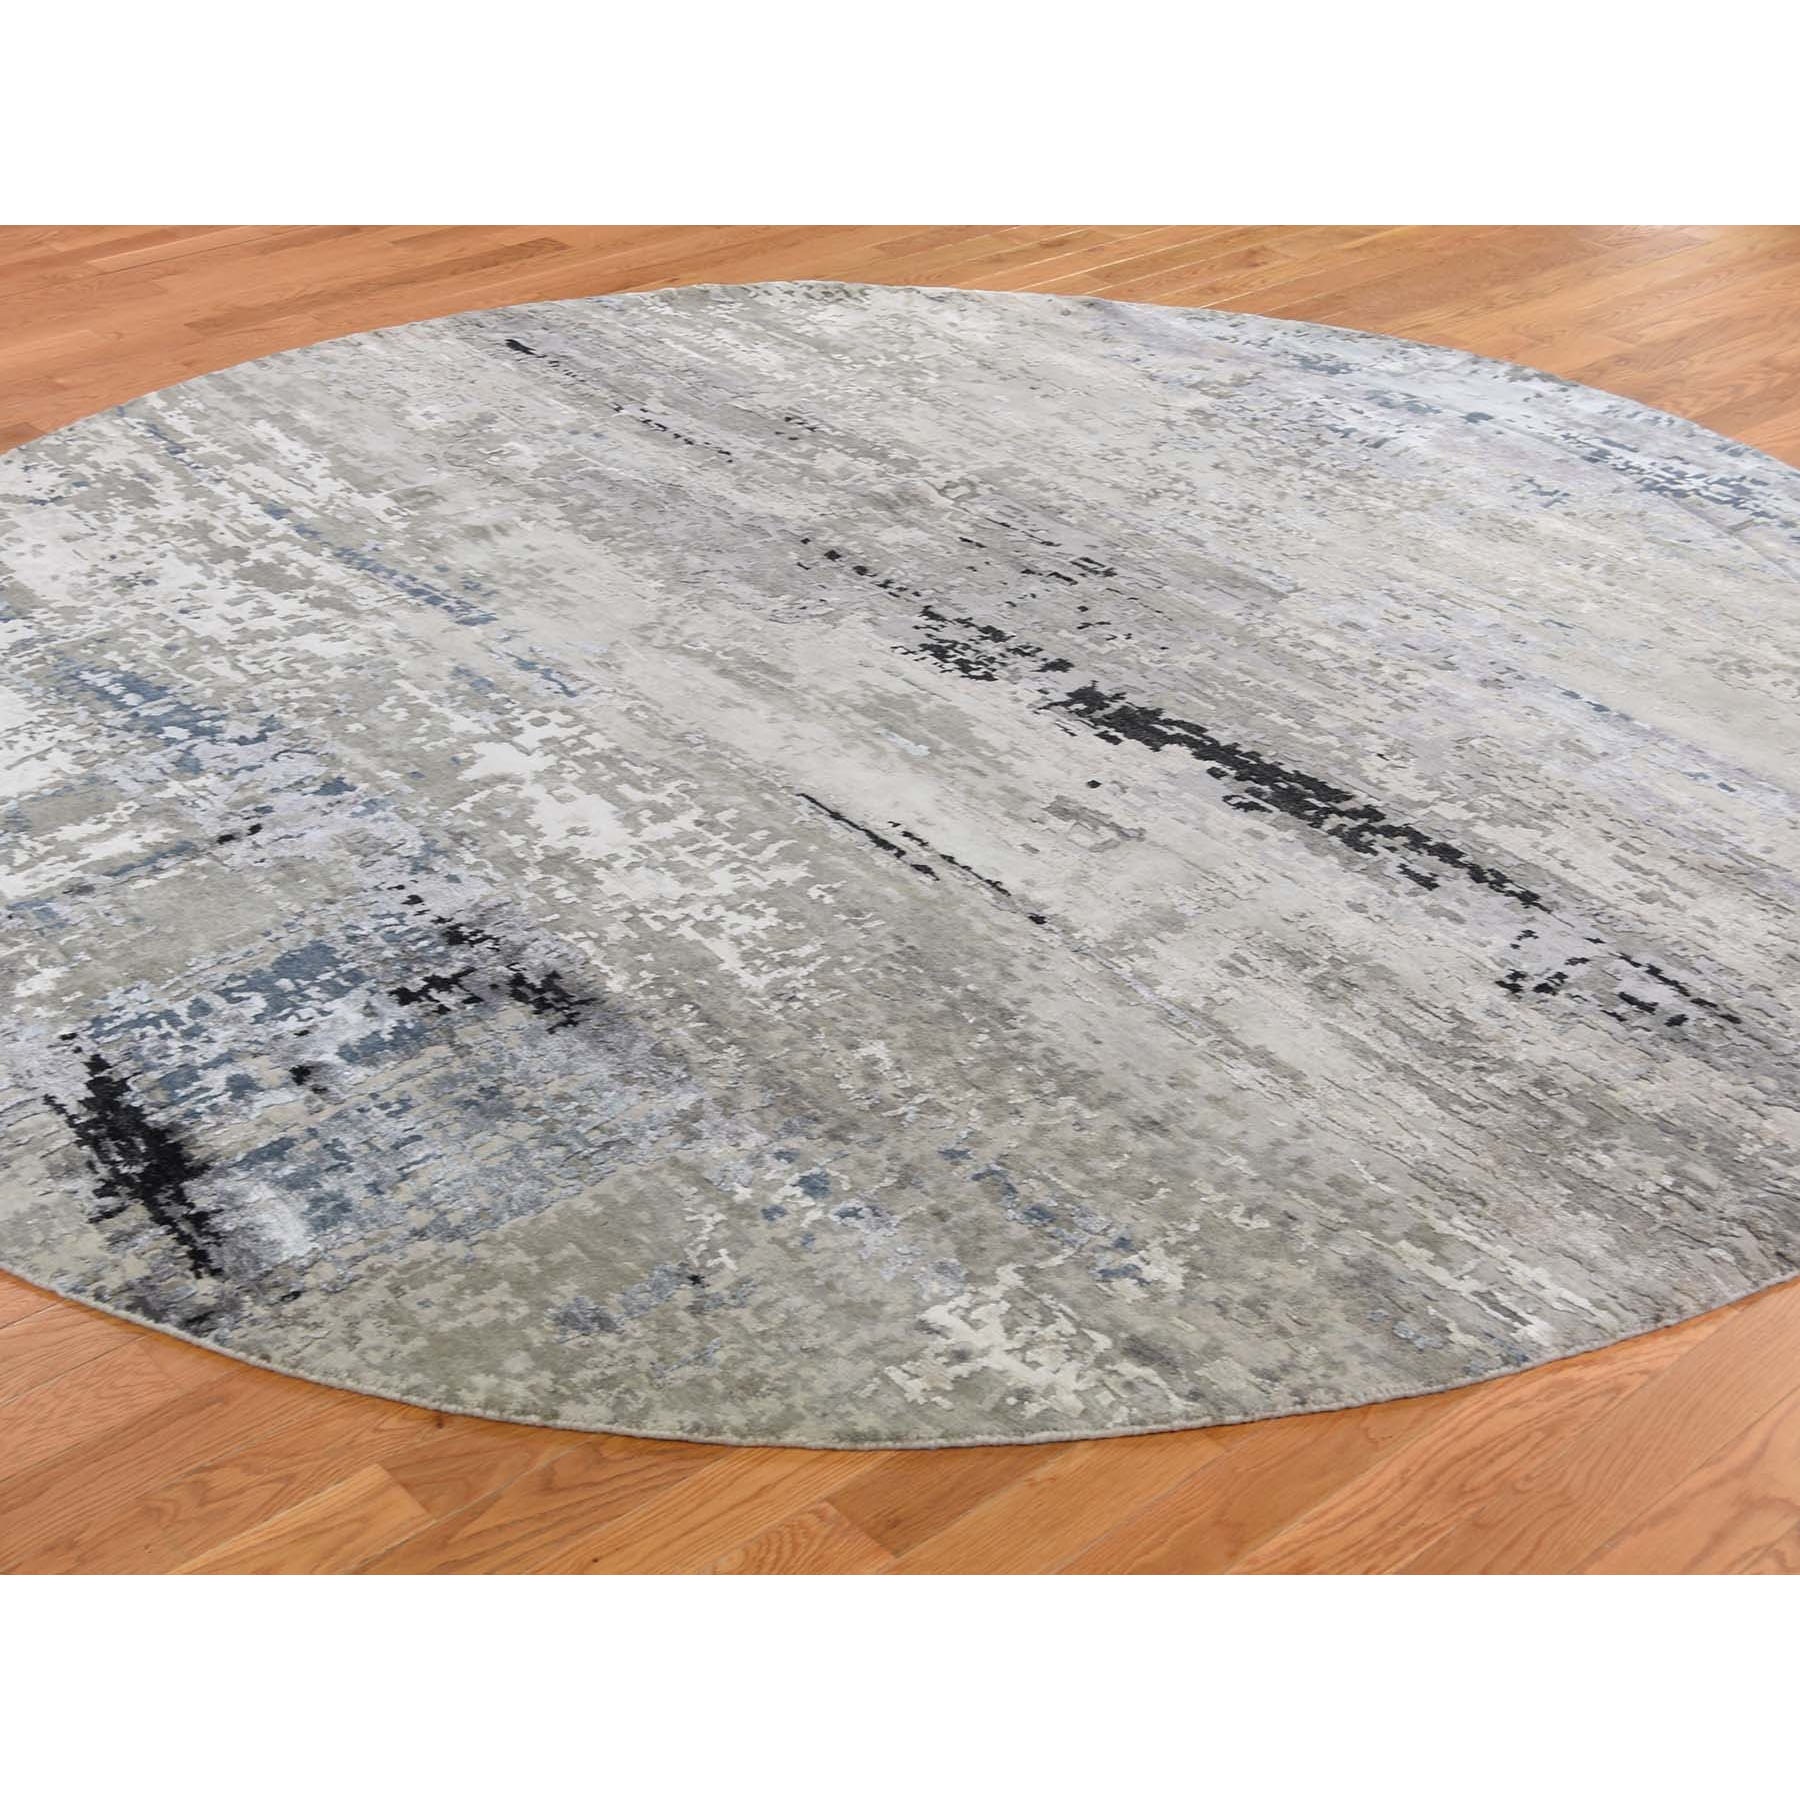 9-10 x9-10  Gray Hi low Pile Abstract Design Round Wool And Silk Hand Knotted Oriental Rug 